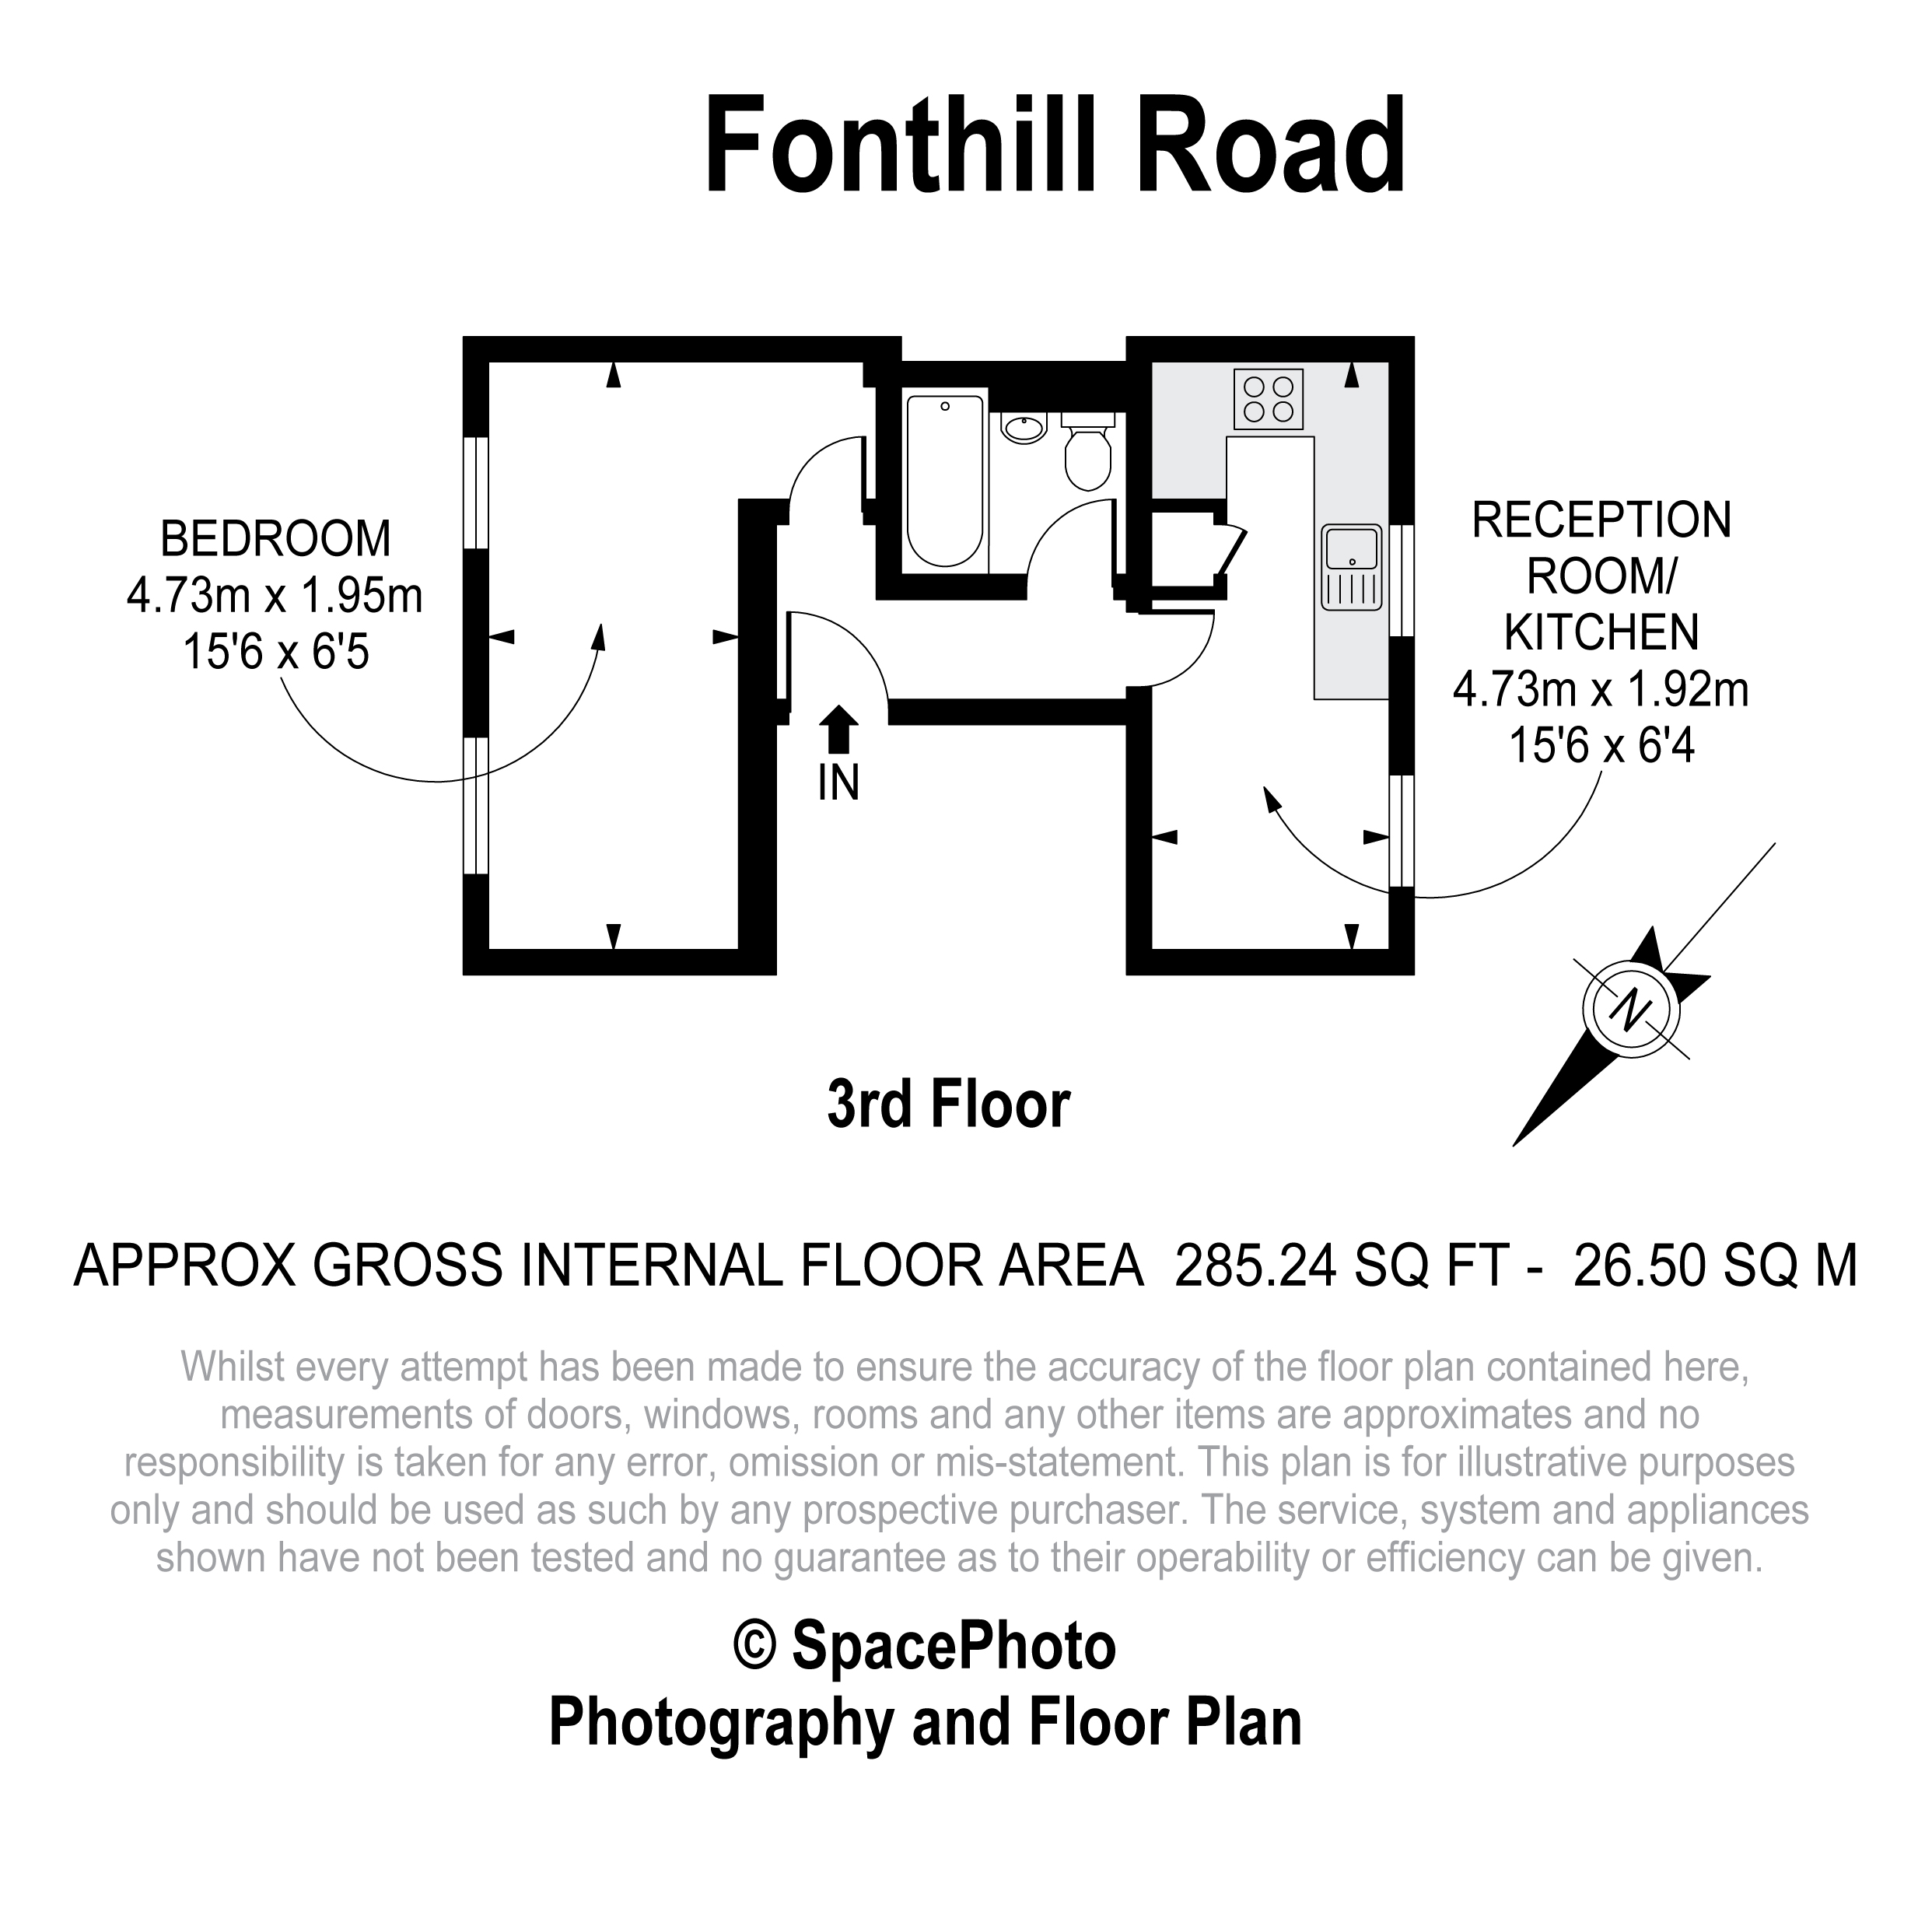 1 bed flat to rent in Fonthill Road, Finsbury Park - Property floorplan